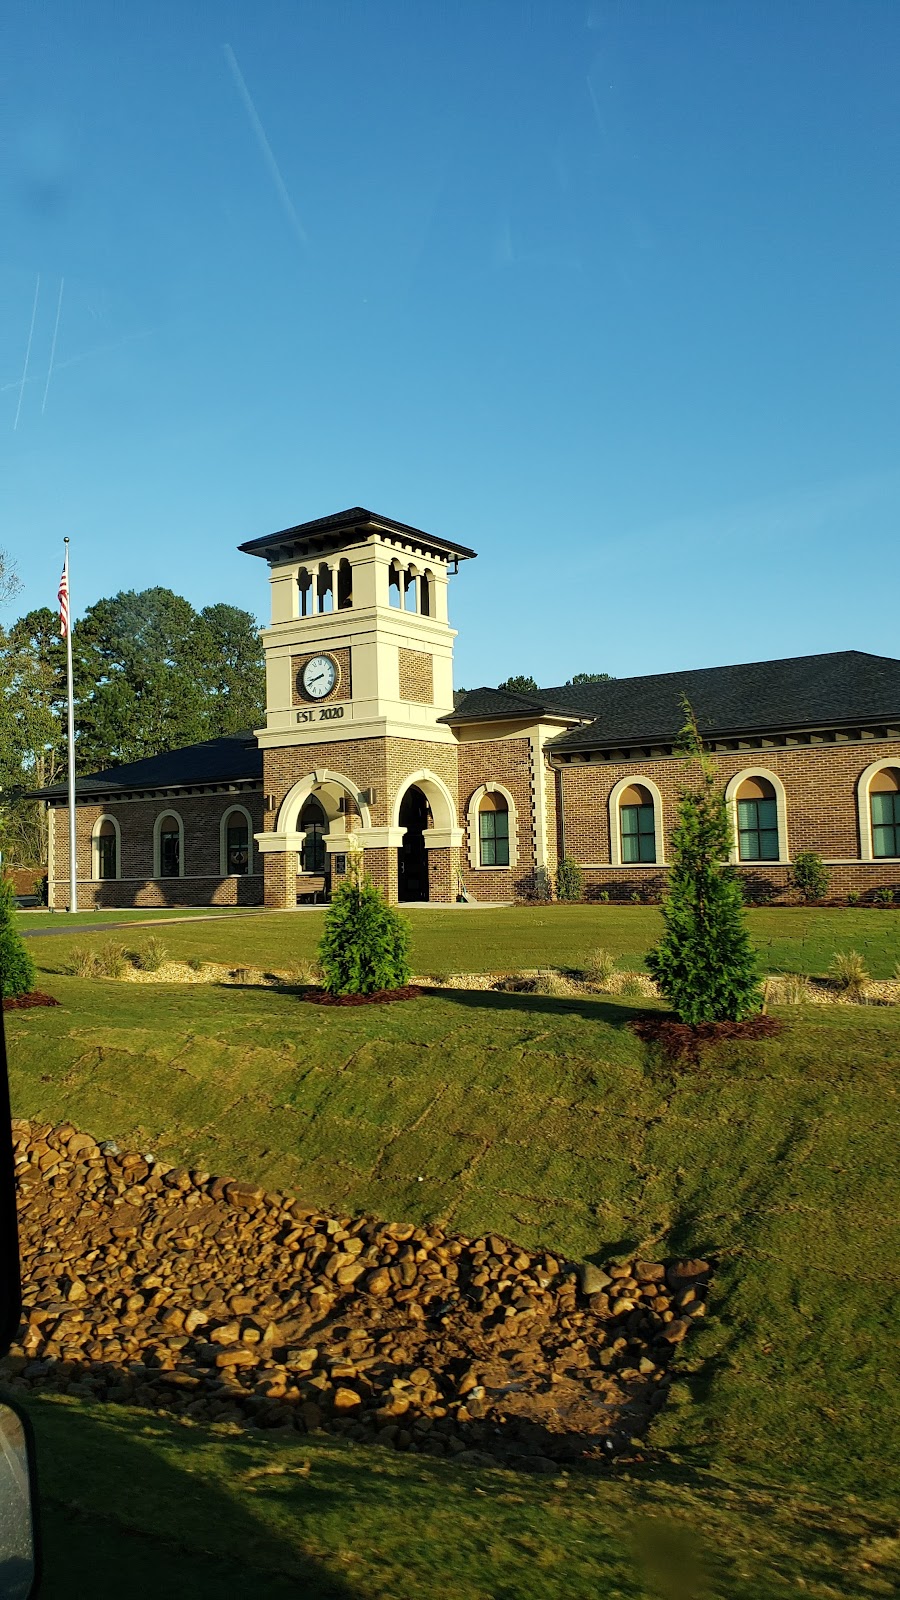 Tyrone Town Hall & Police Department | 950 Senoia Rd Suite A, Tyrone, GA 30290, USA | Phone: (770) 487-4038